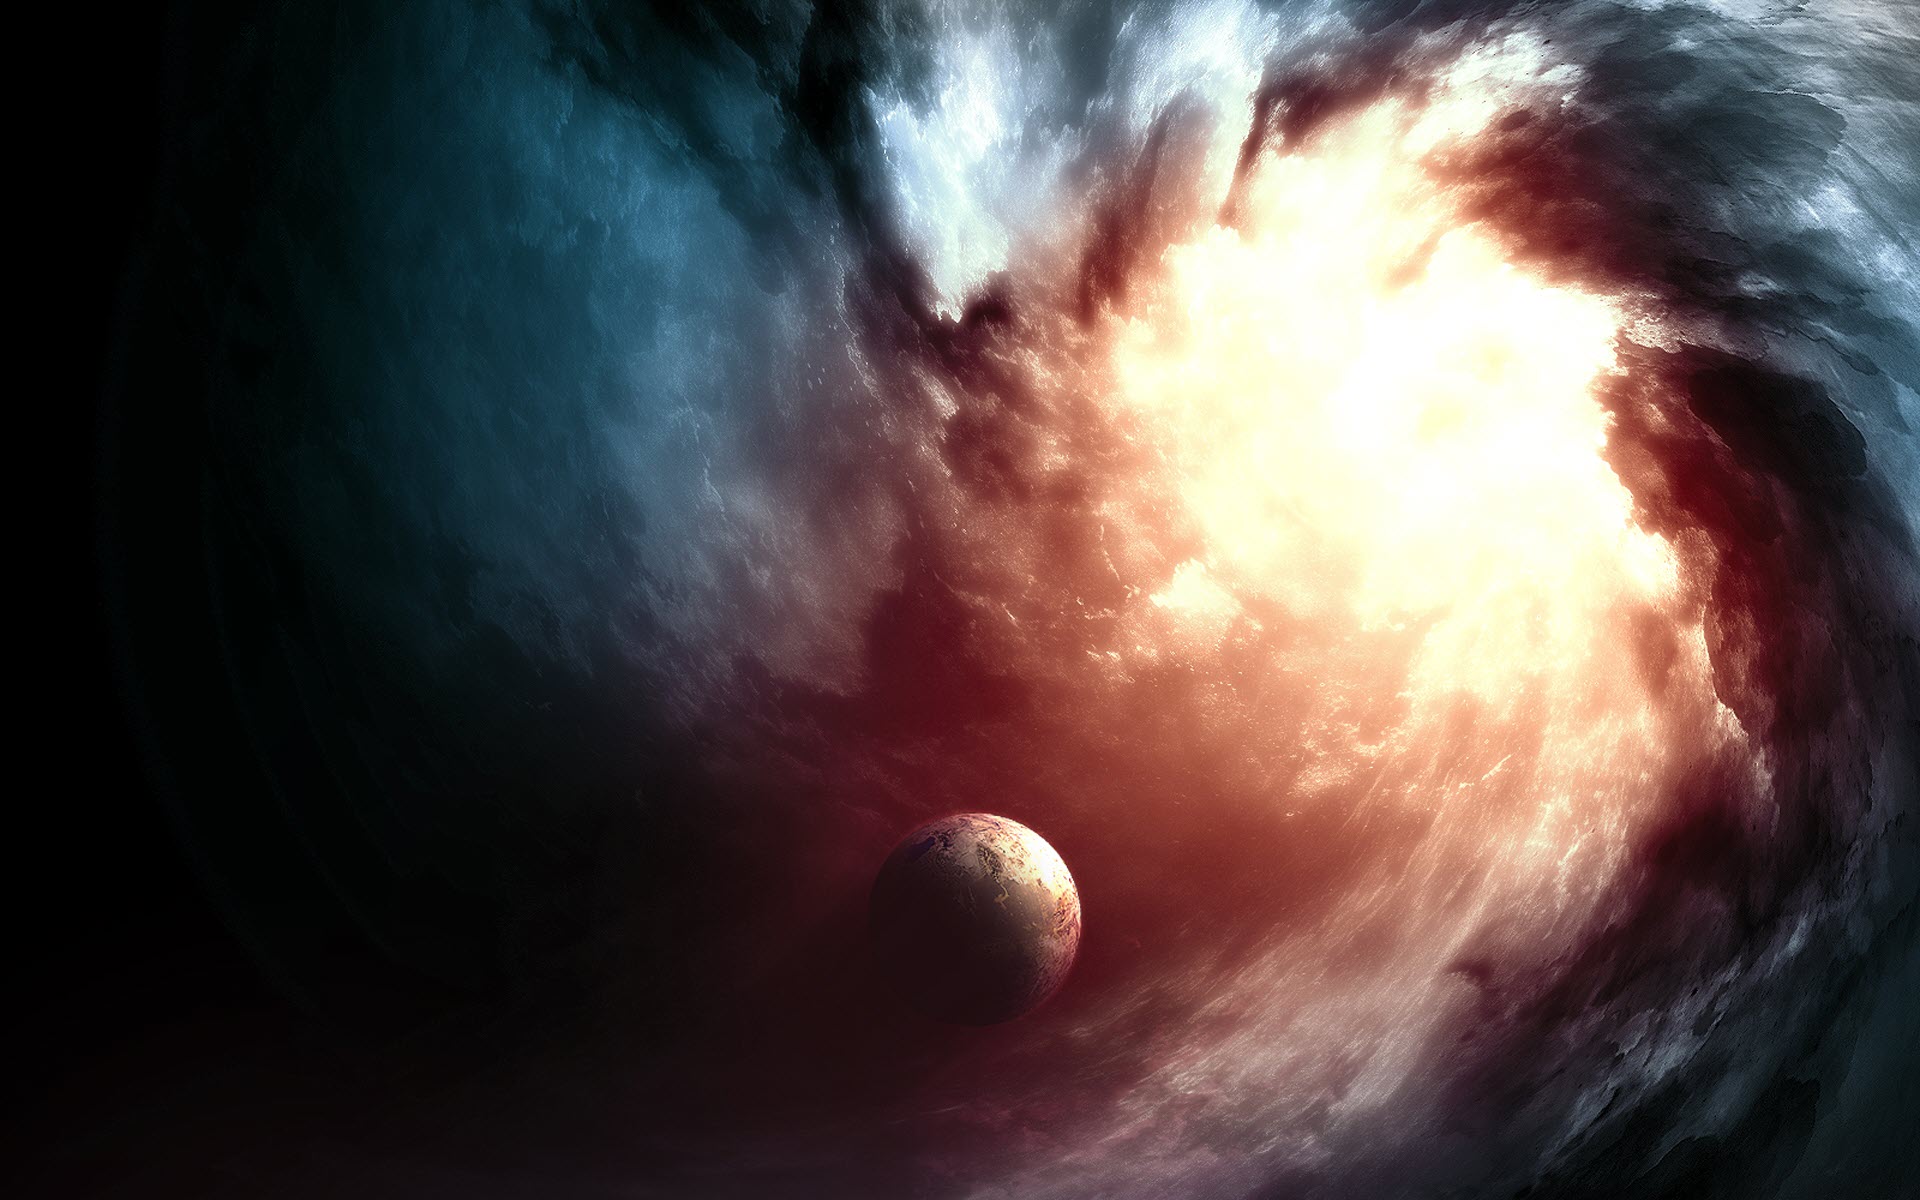 outer space, galaxies, planets, Earth, black hole, vortex - desktop wallpaper